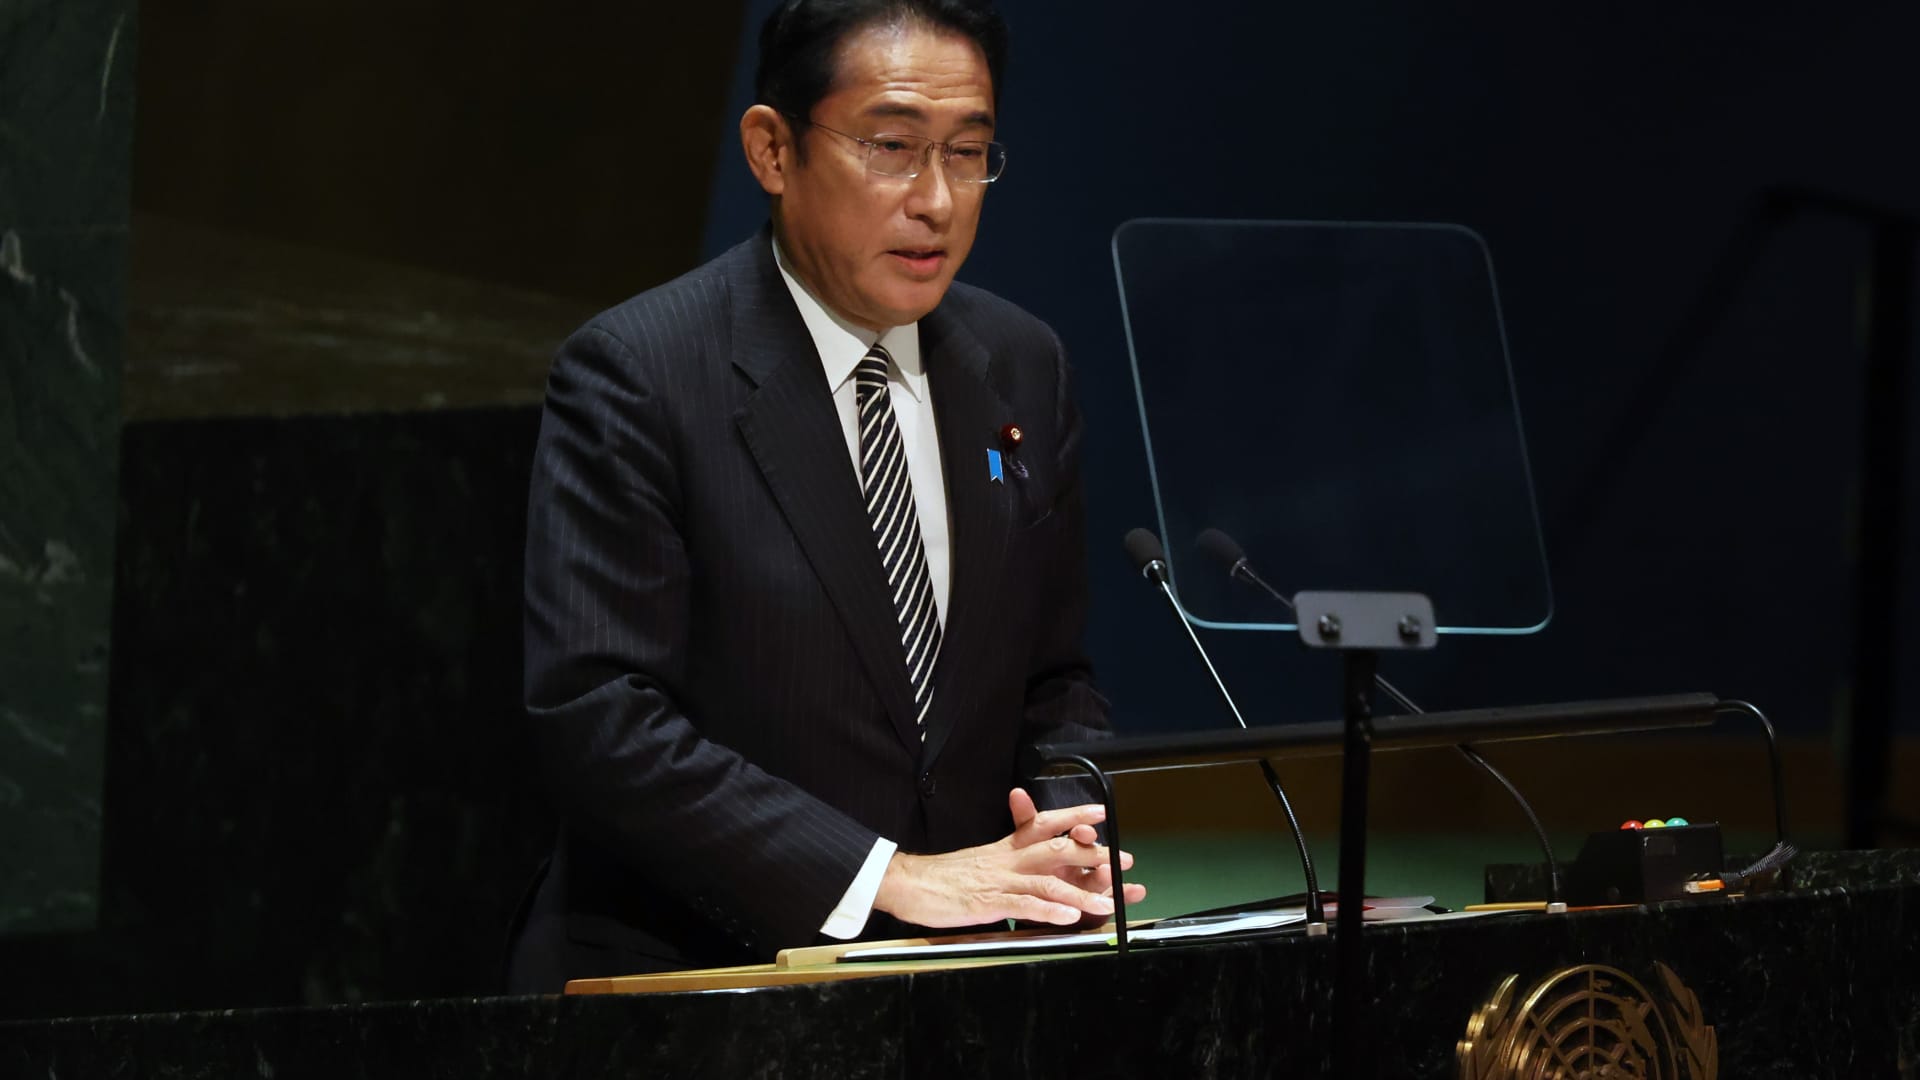 Prime Minister of Japan, Fumio Kishida speaks at the start of the tenth annual review of the Nuclear Non-Proliferation Treaty at U.N. headquarters on August 01, 2022 in New York City. Japan's average minimum wage is set to rise at a record pace this year, the government said on Tuesday, a positive development for Prime Minister Fumio Kishida's efforts to cushion households from global commodity inflation.